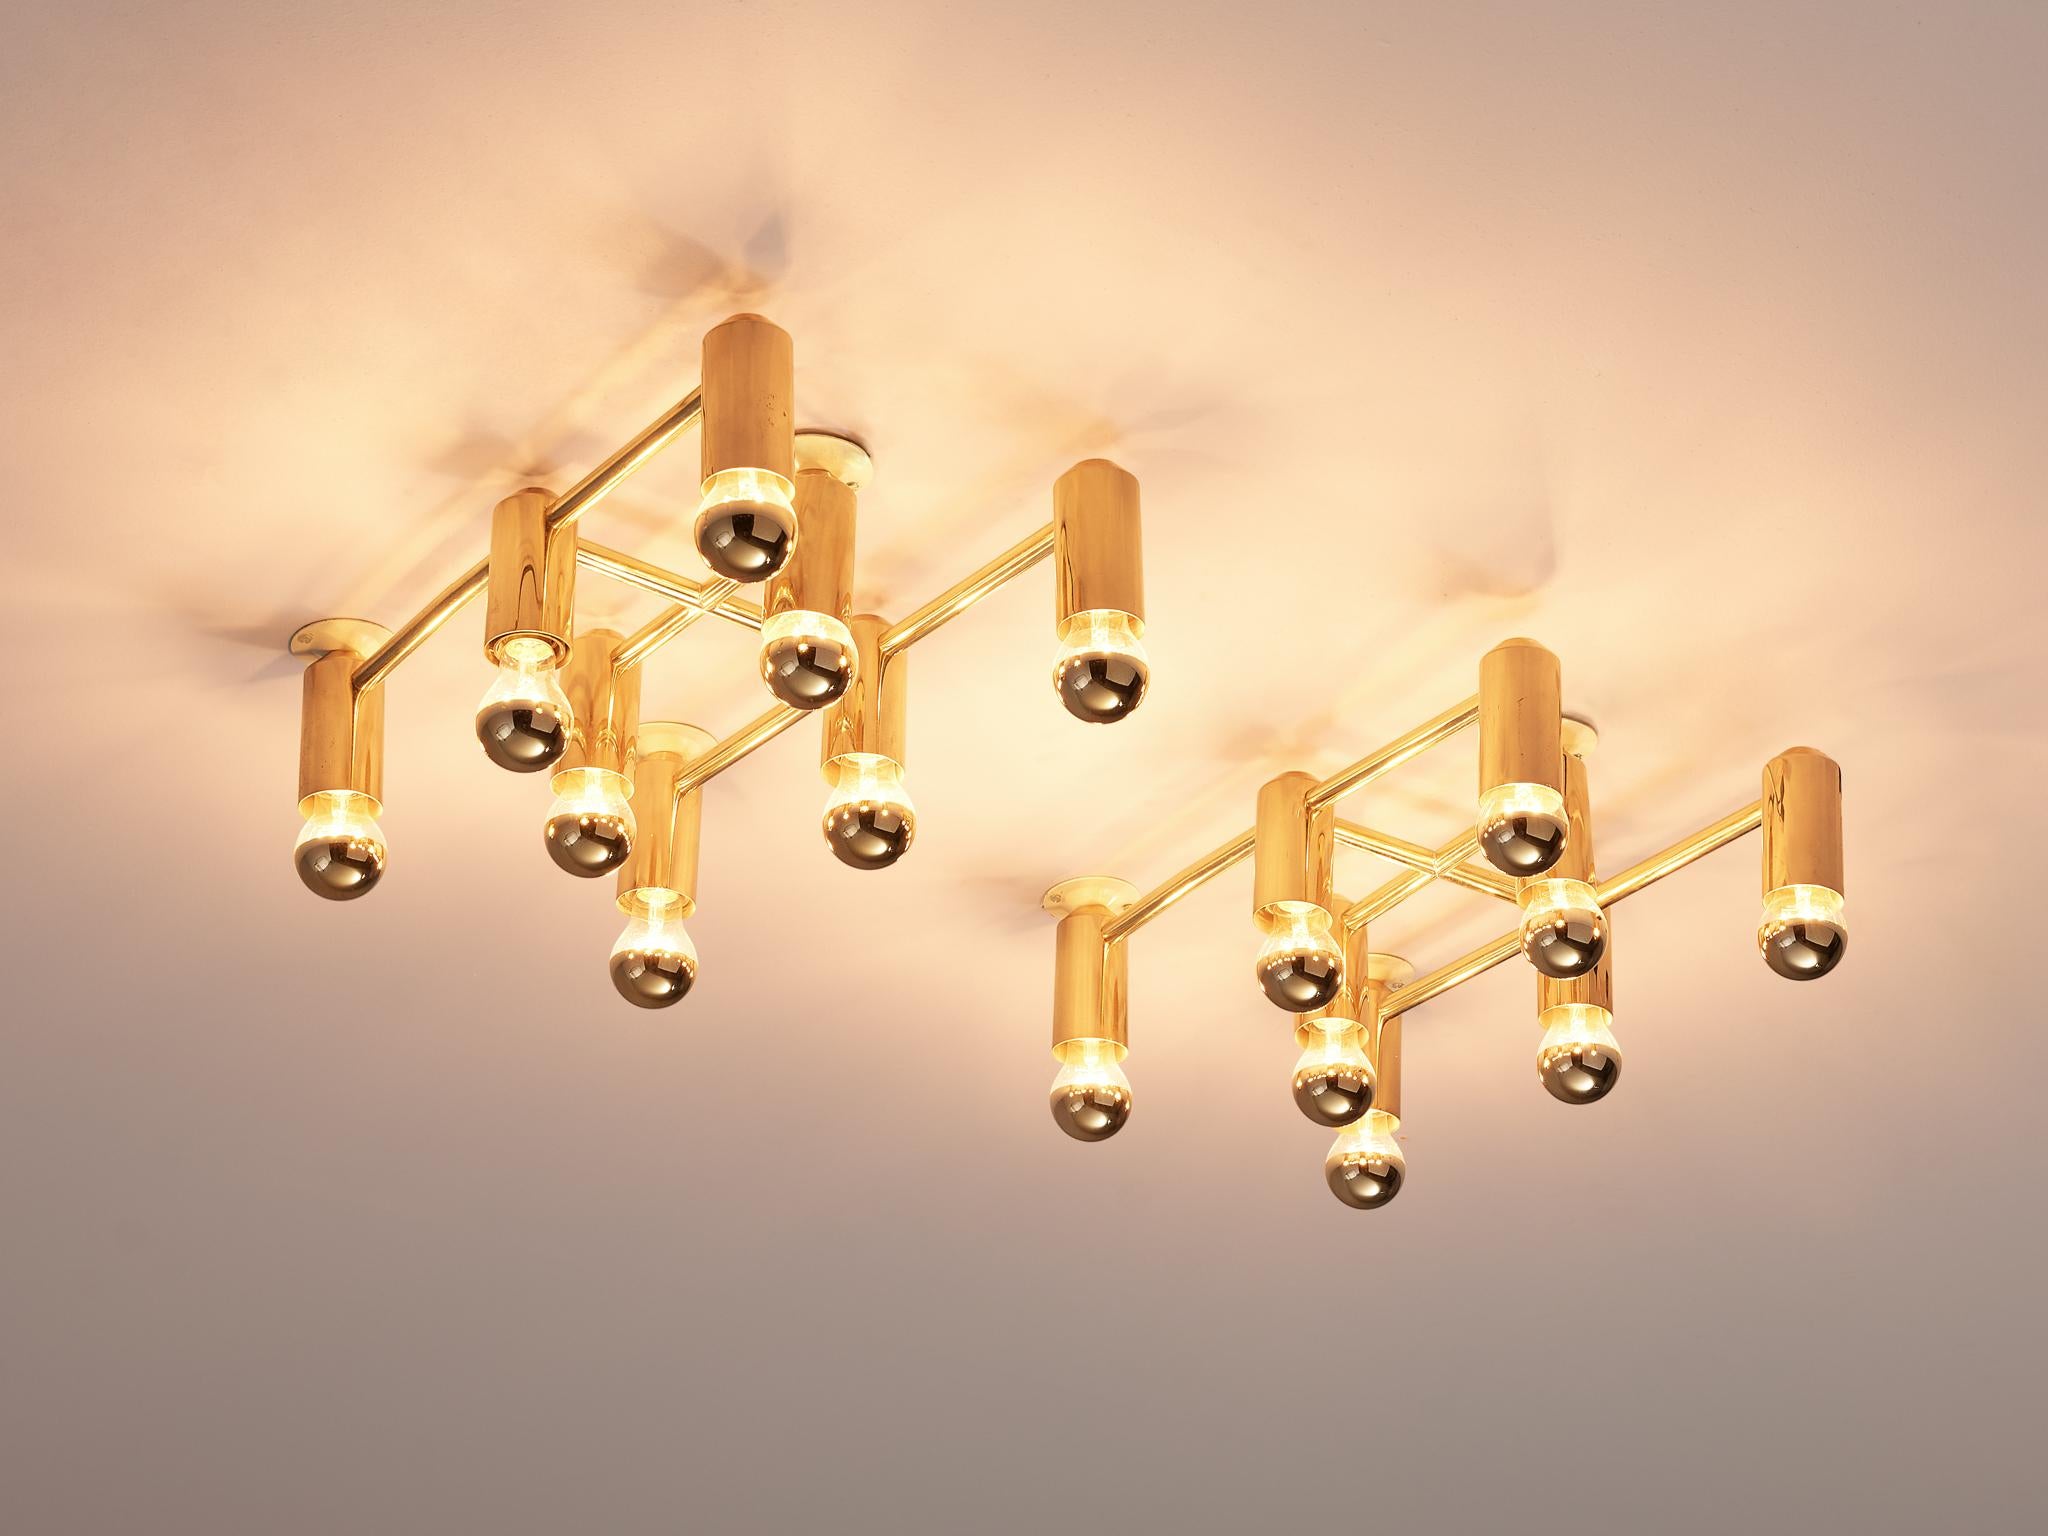 Ceiling lights, brass and glass, Europe, 1960s

This set of delicate ceiling lights are minimalist yet warm. Each light consists of eight light bulbs that are placed in three rows of which the middle section holds only two and the outer three. The